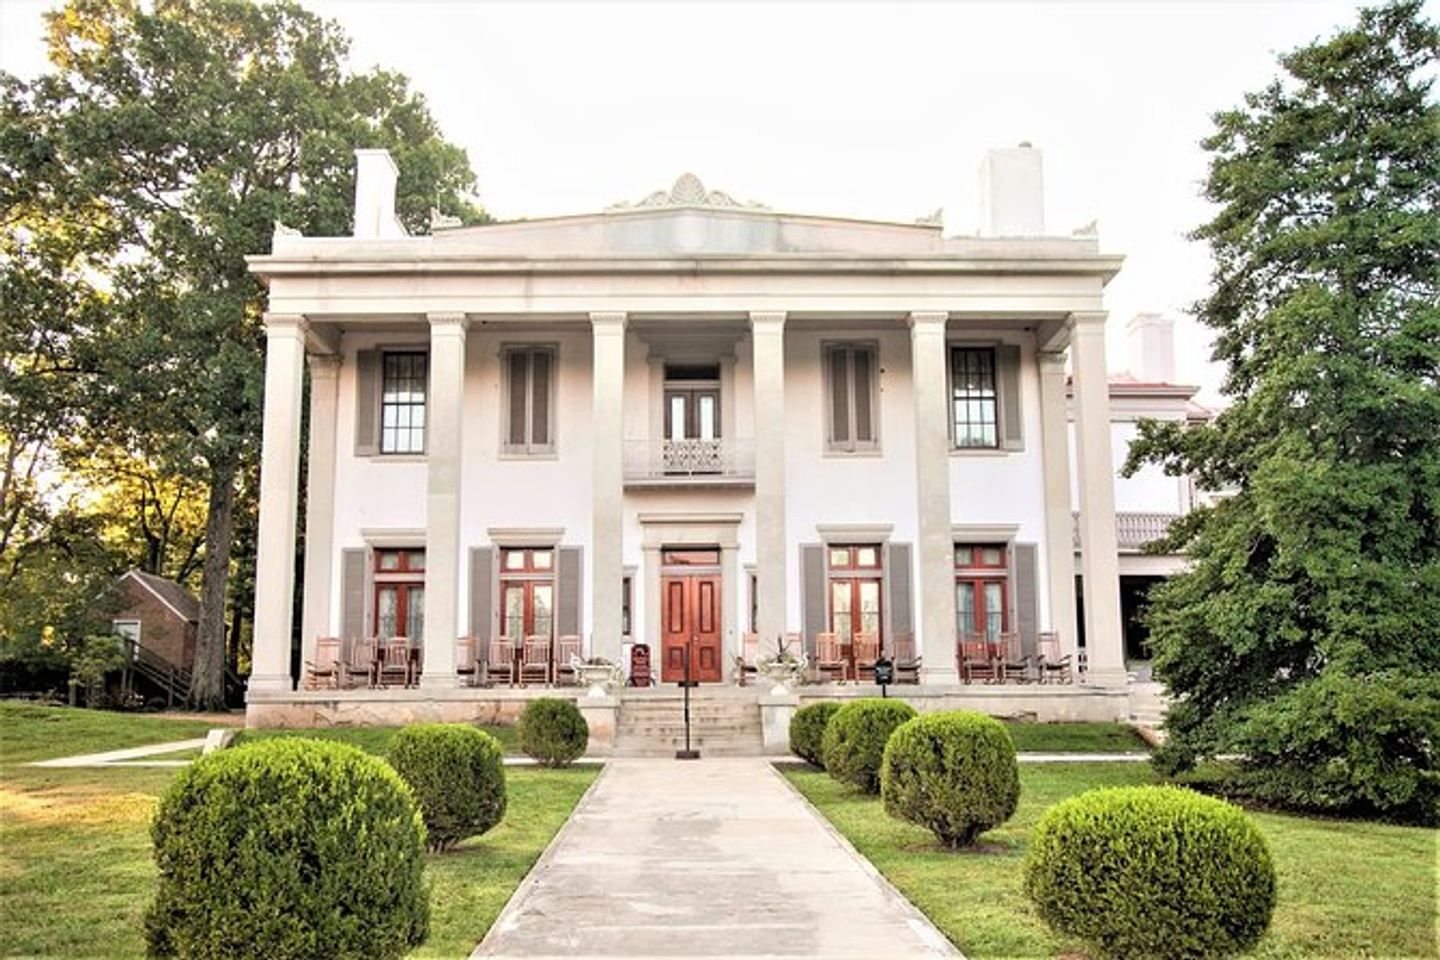 Athens of the South Tour - 7/29 from Noon to 6pm